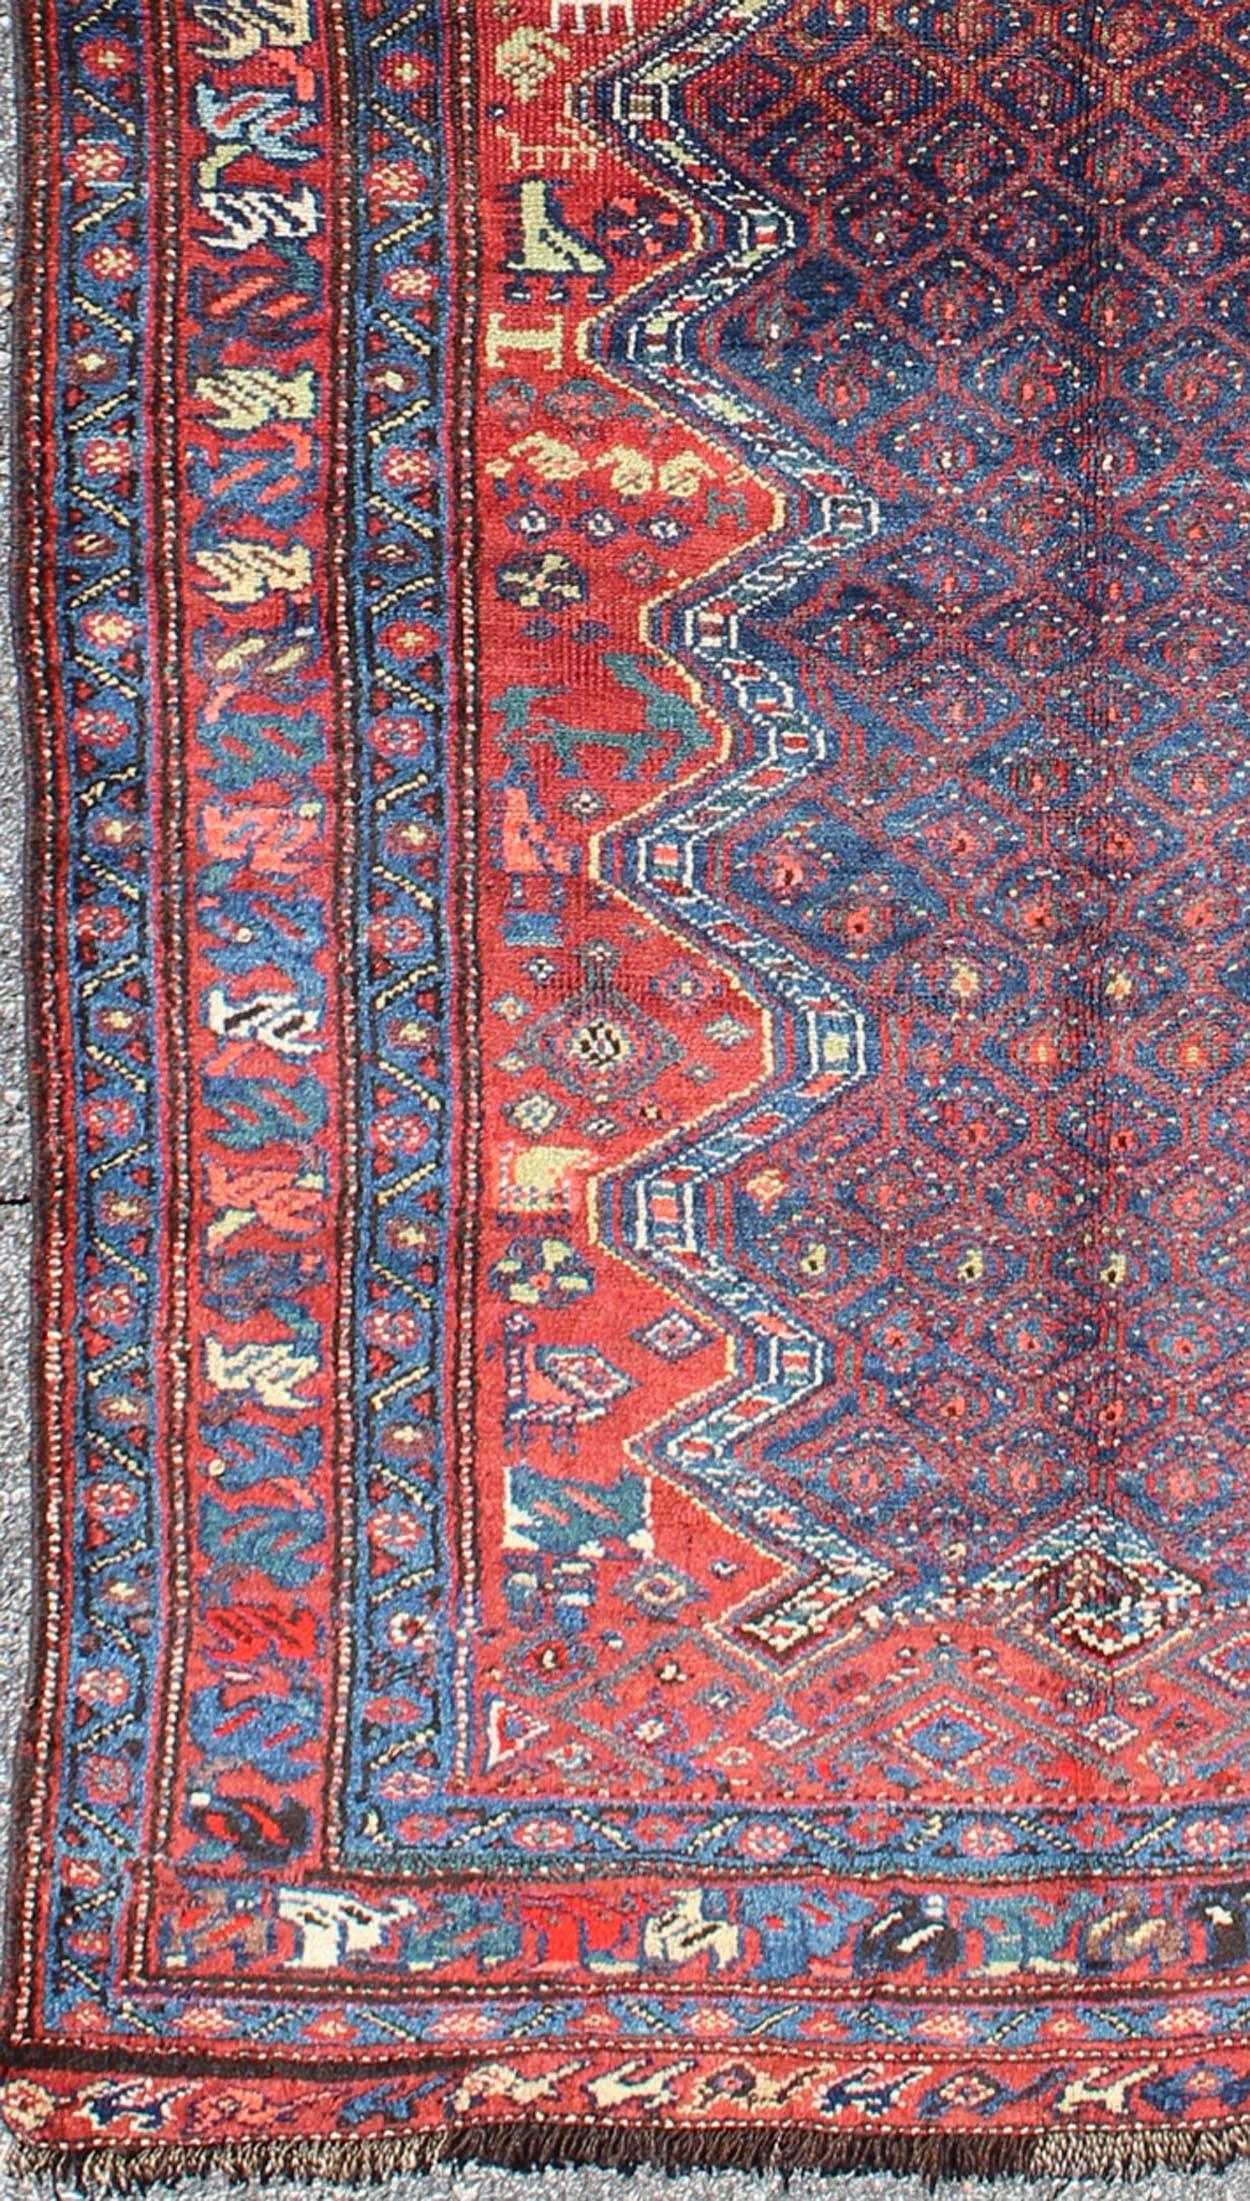 Red and Blue Antique N.W. Persian Rug with Zig-Zag Field and Tribal Motifs, Keivan Woven Arts/ rug 13-0913, country of origin / type: Iran / N.W. Persian, circa 1900

This antique early-20th century Northwest Persian runner features a deep blue